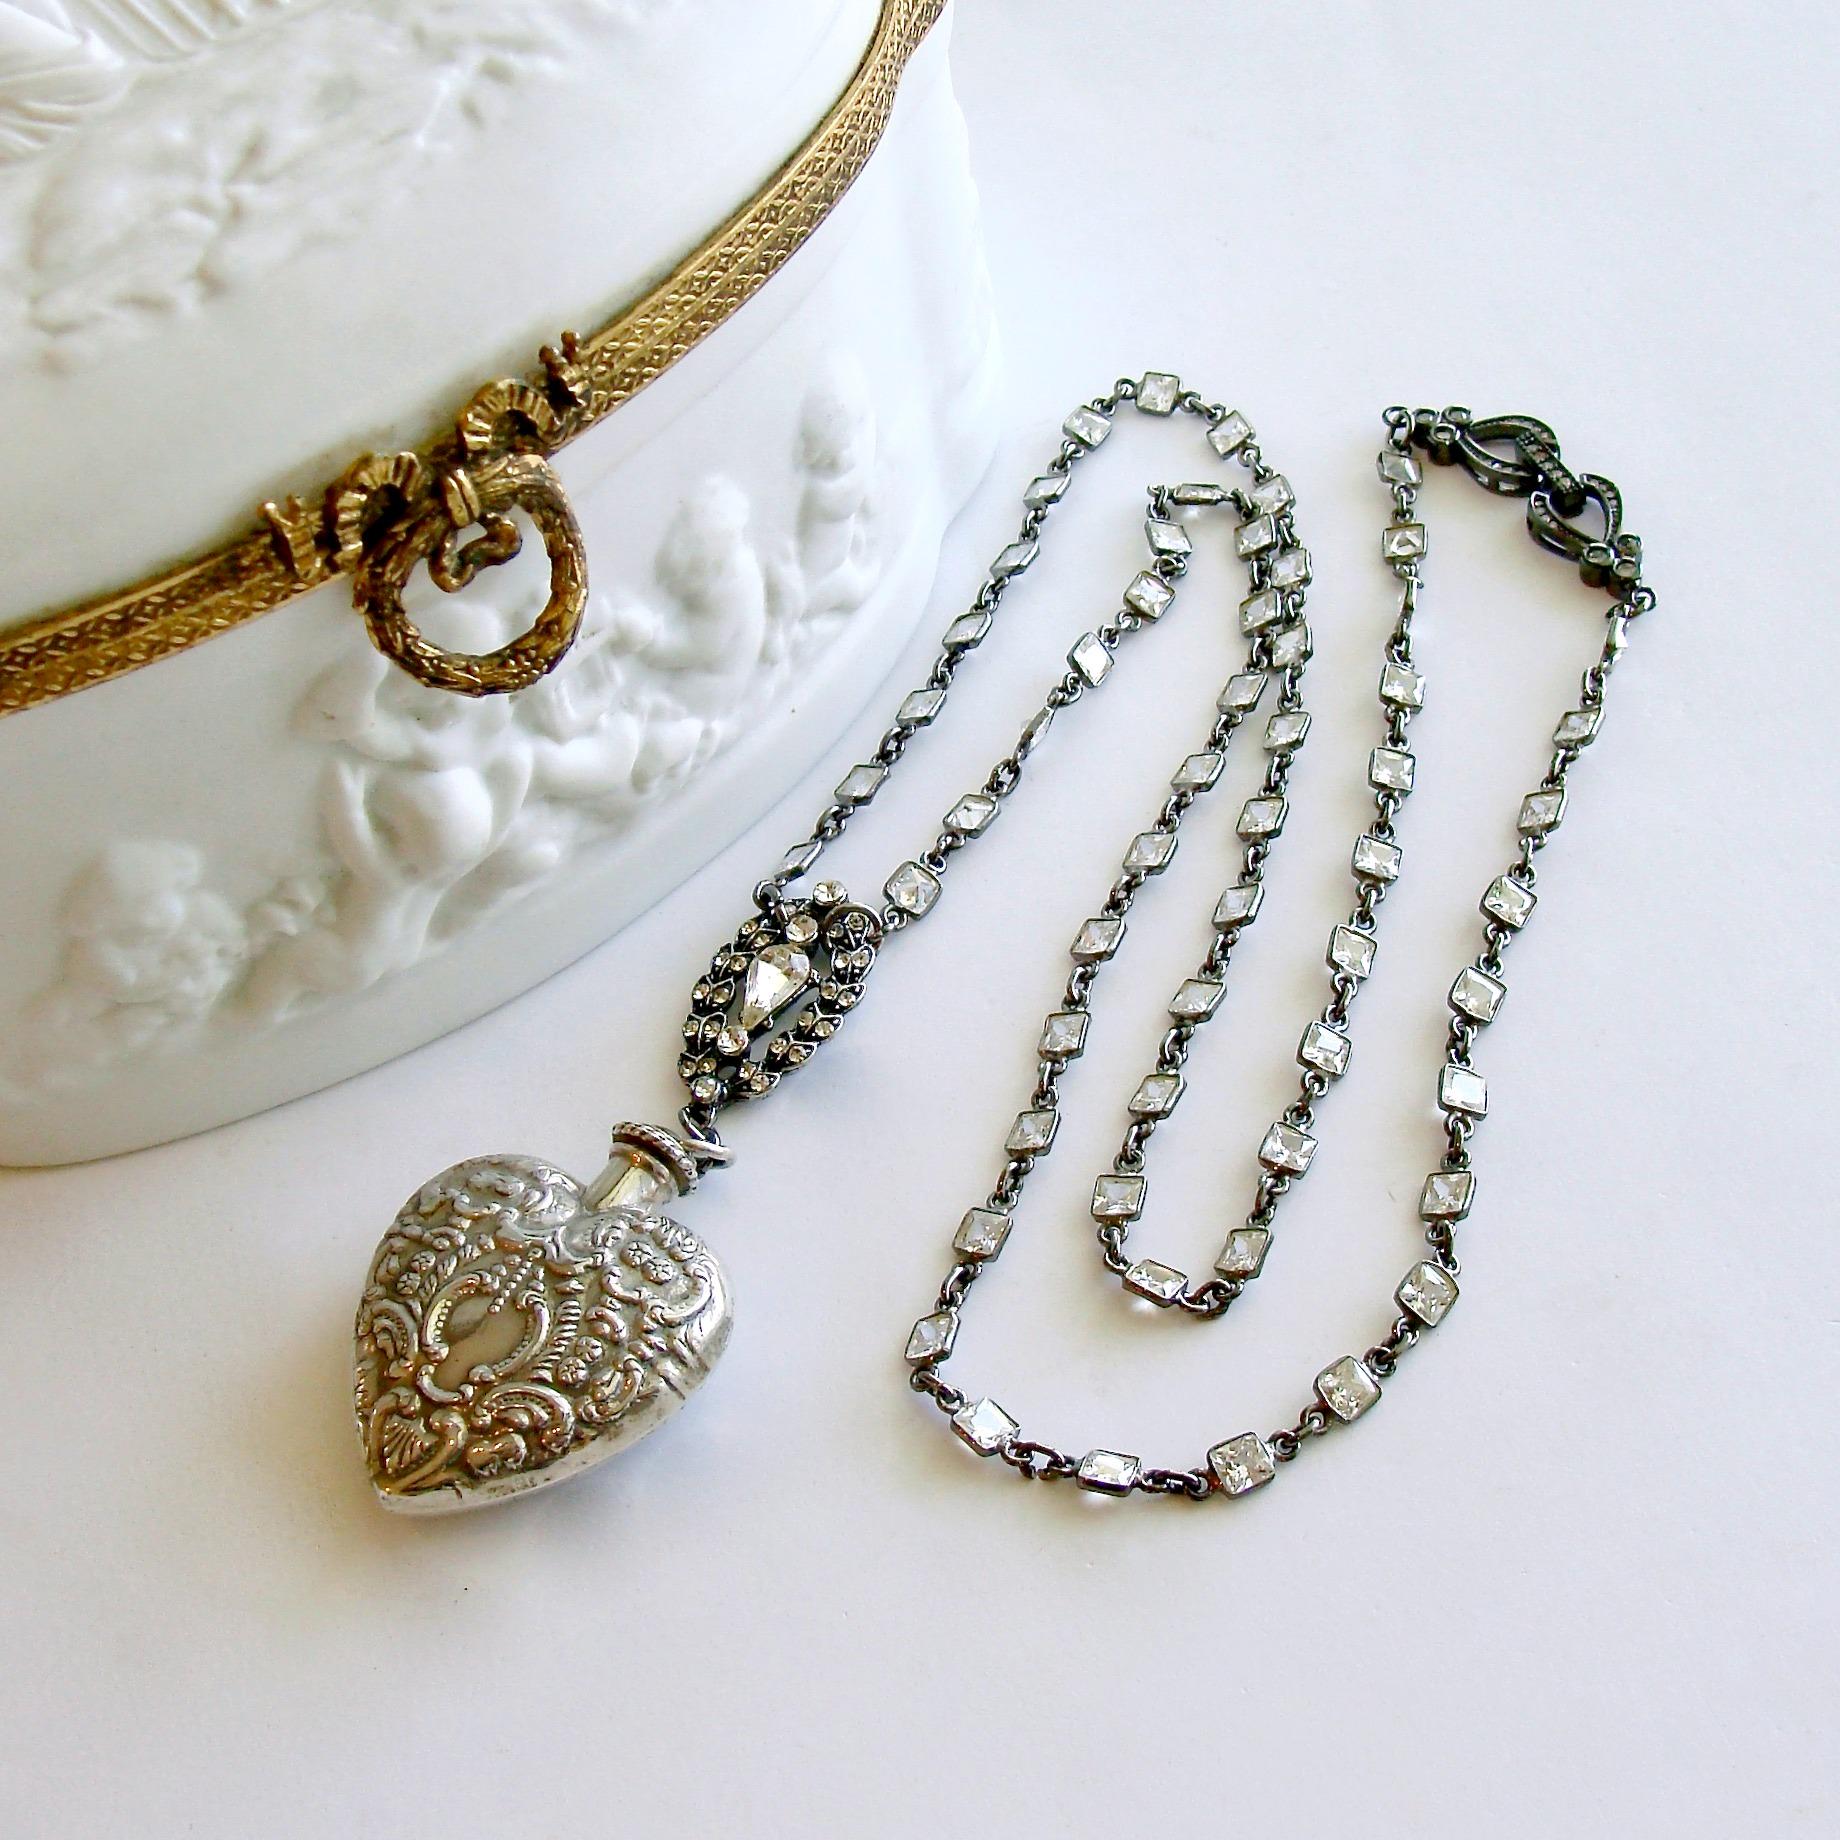 Victorian Sterling Silver Repousse Chatelaine Heart Scent Bottle, Cressida II Necklace